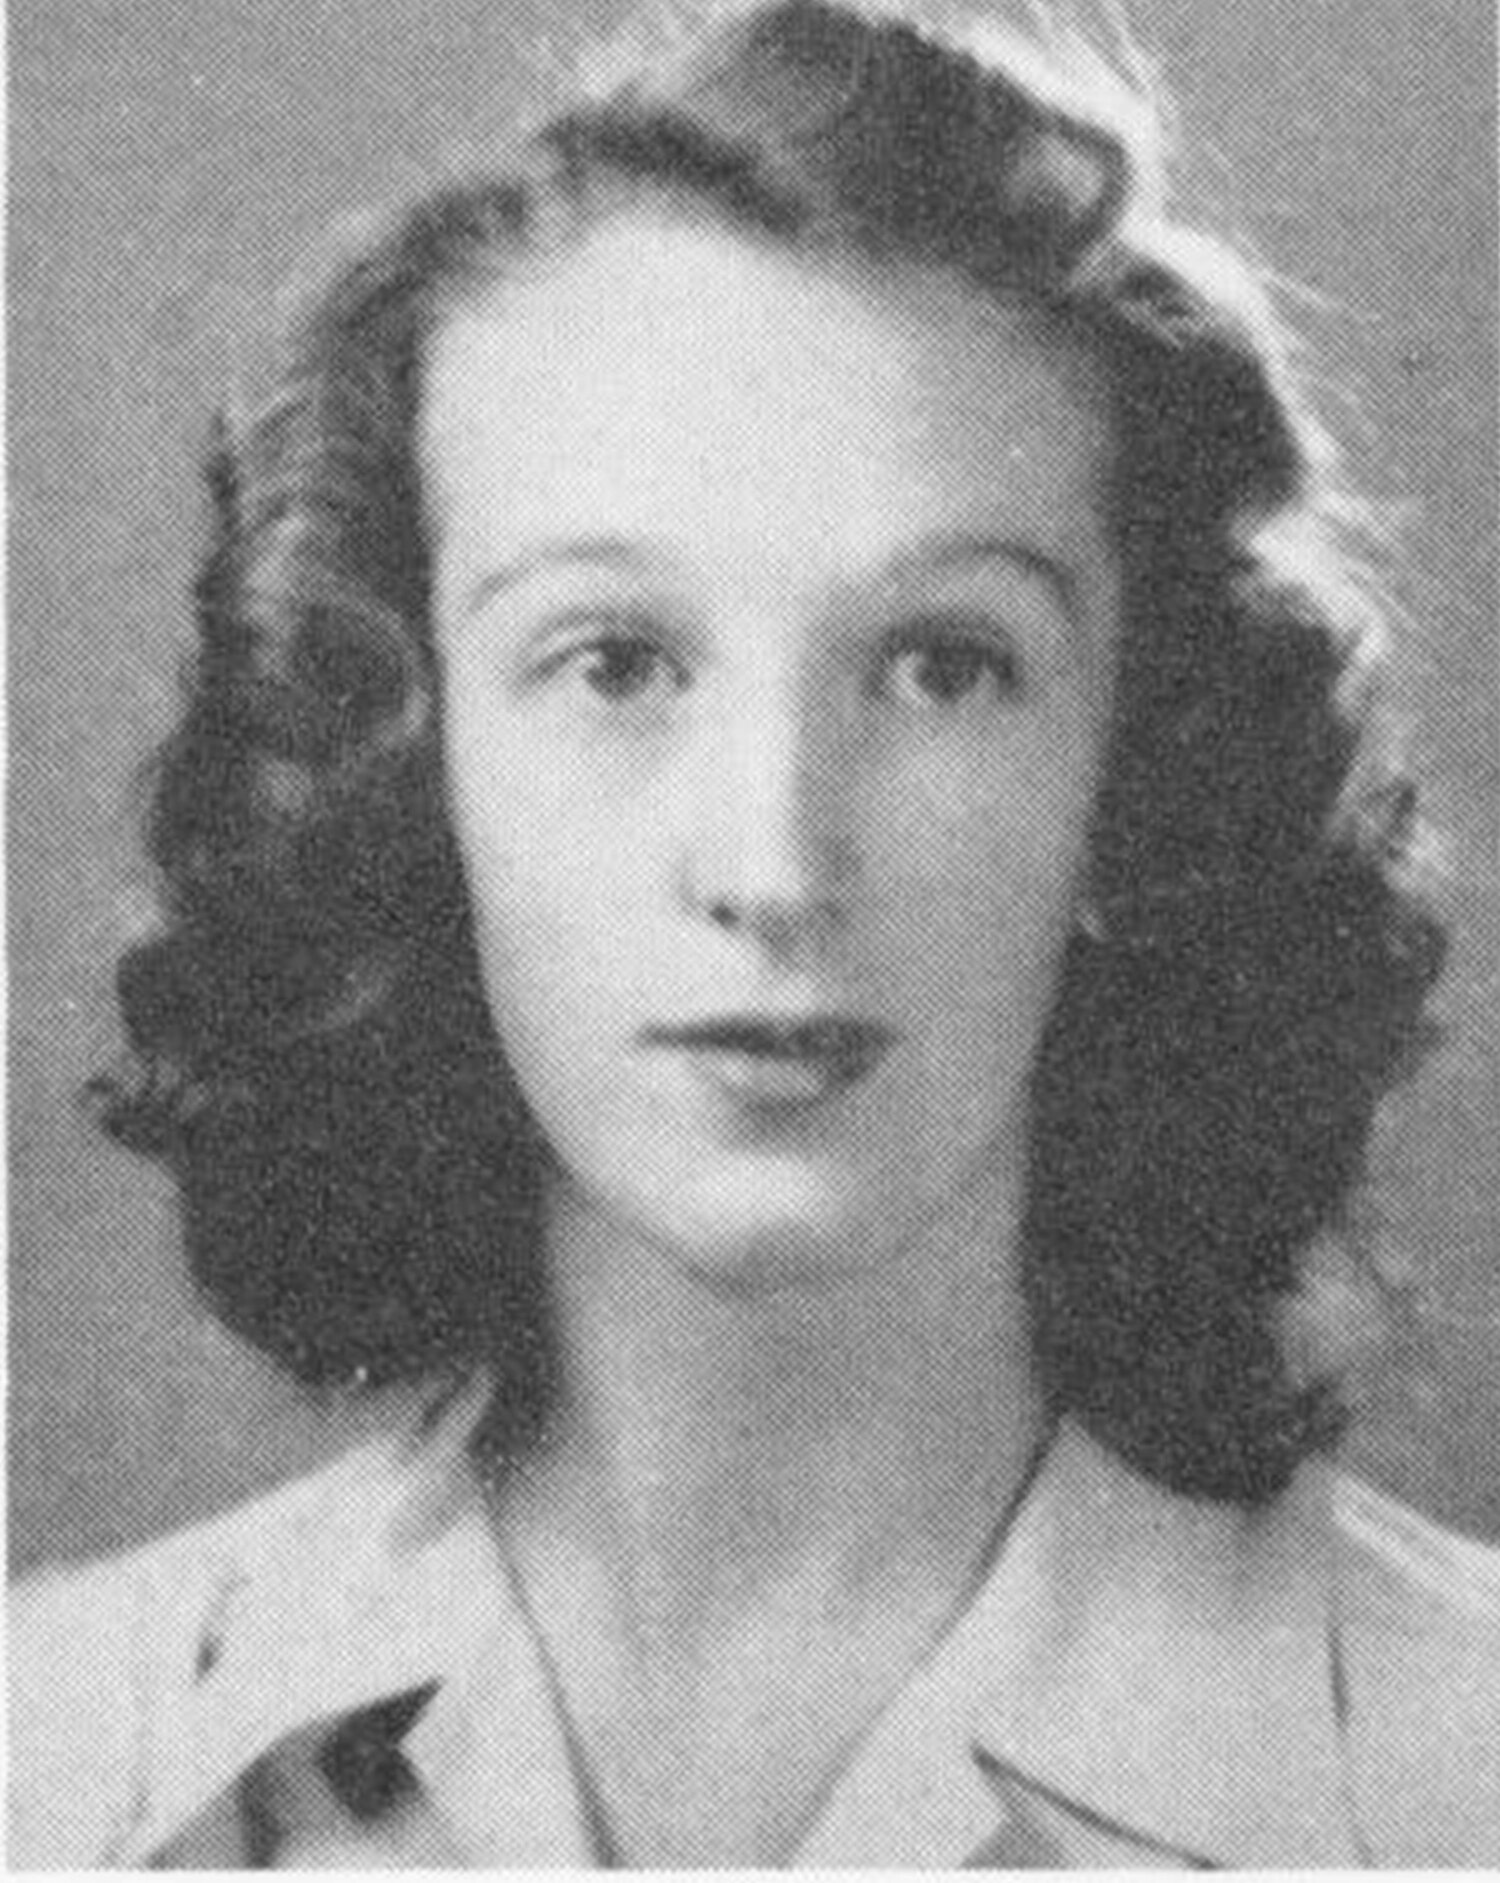 June Steinecke in her senior class photo at Patchogue High School in 1945. The description under her photo says, 